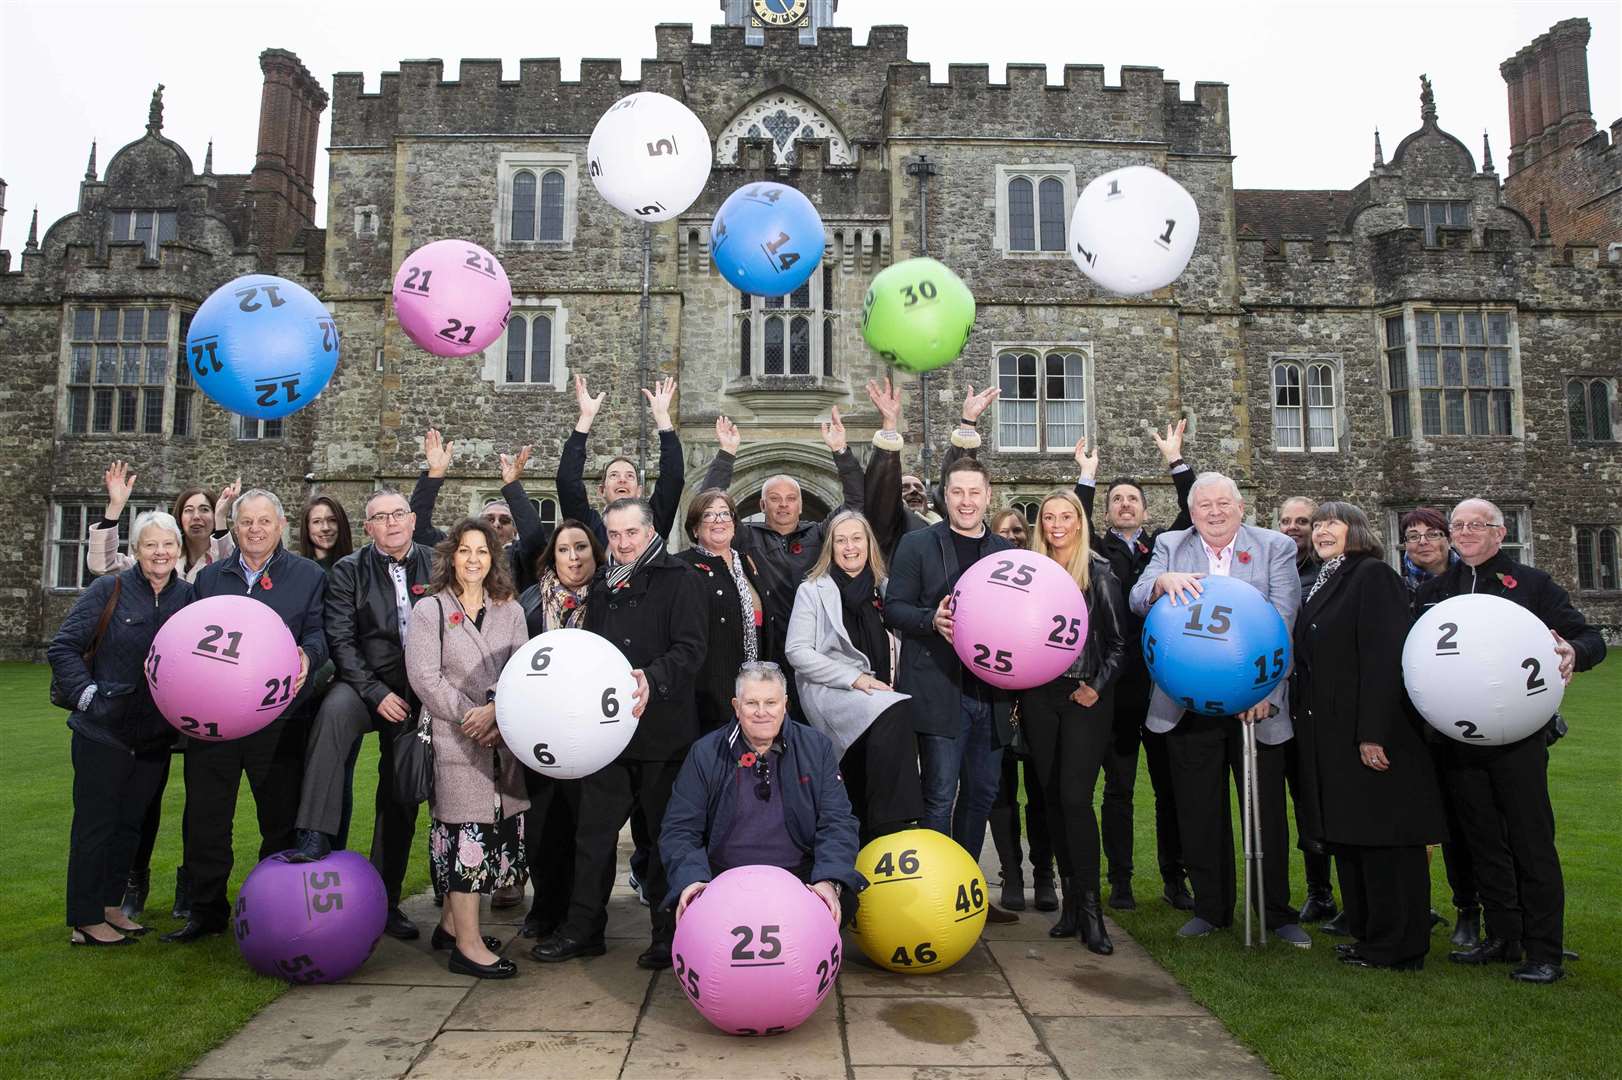 Winners from across the south gathered at Knole Park to celebrate The National Lottery's 25th anniversary